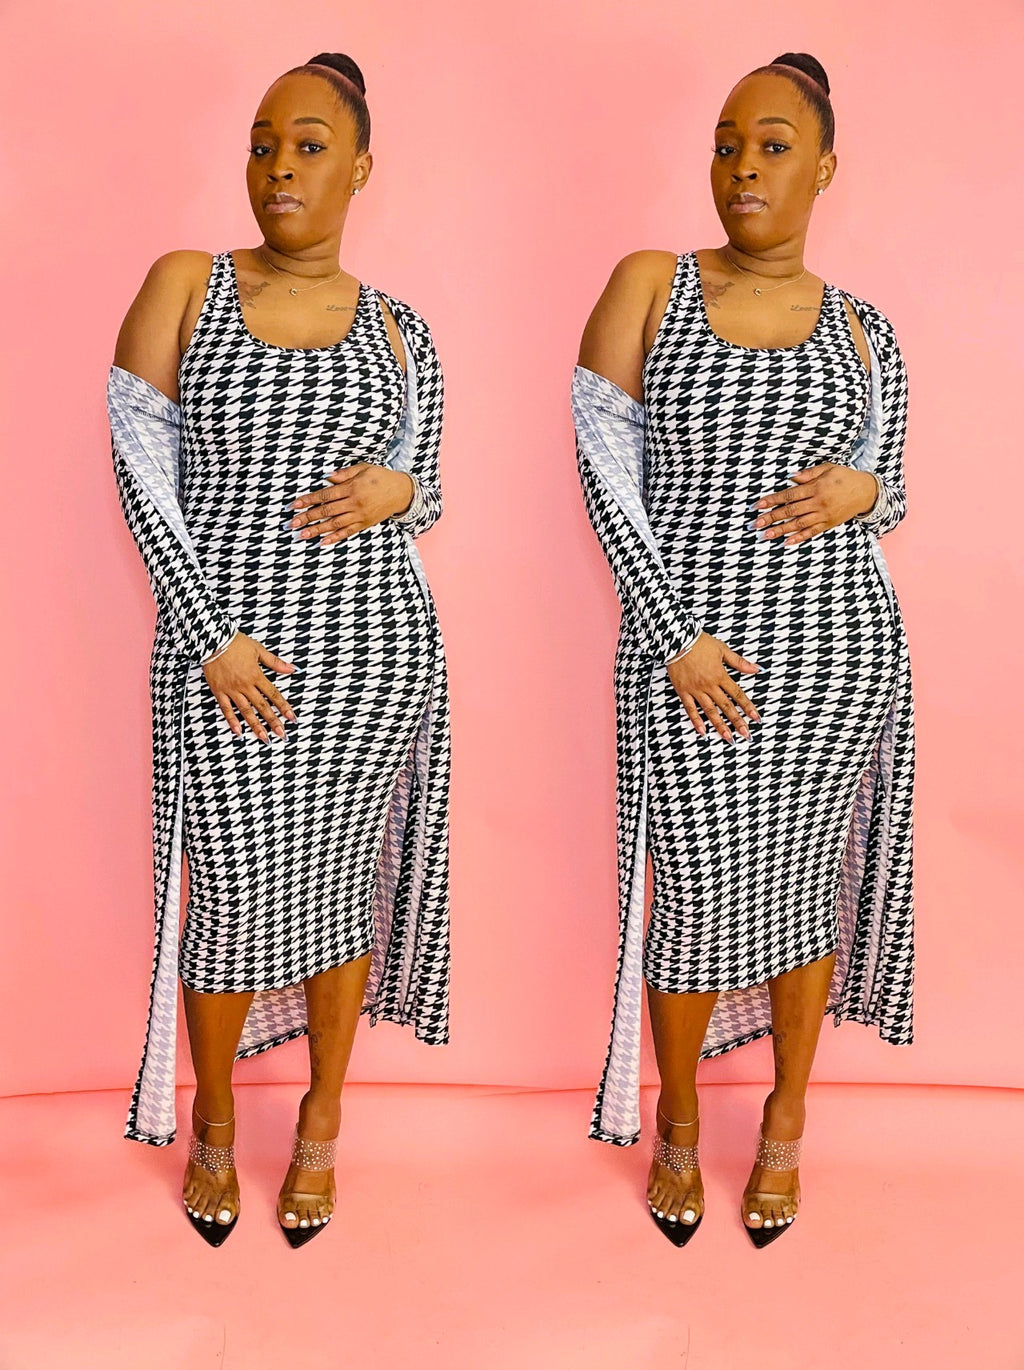 J. ELISE BOUTIQUE Step out with your girls in this lovely tank top sleeveless midi length dress with cardigan duster. Style: Houndstooth S(4-6) M(8-10) L(12-14) Content: 92%POLYESTER 8%SPANDEX  Model is 5”5 155lbs wearing a Large 